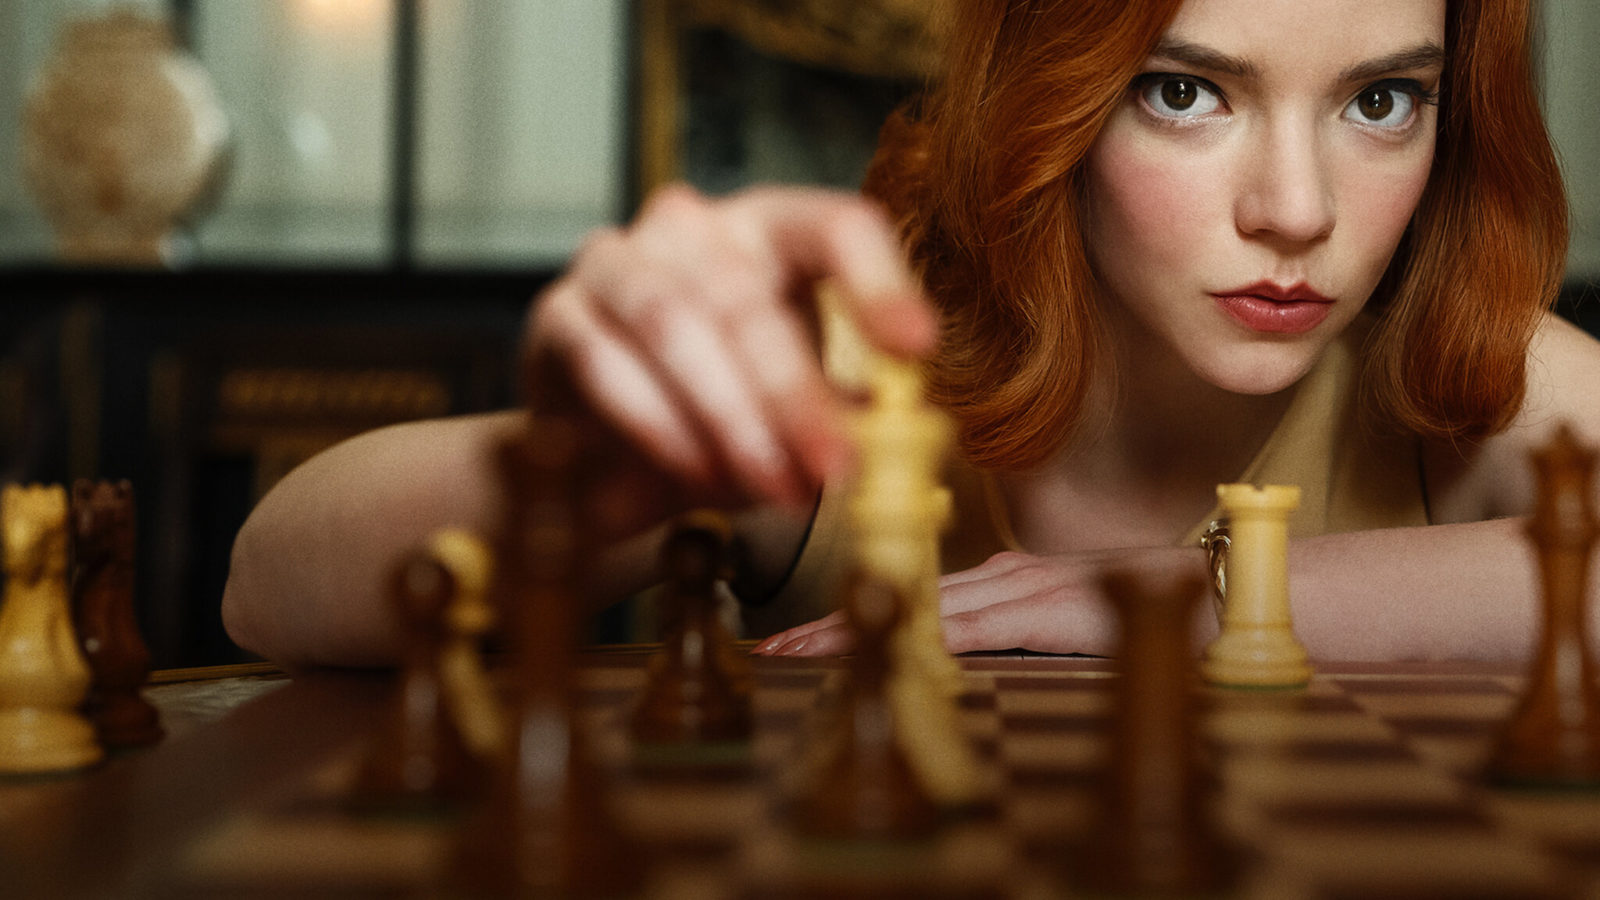 If You Can Pass This Quiz, You've Spent Way Too Much Time on Netflix The Queen's Gambit